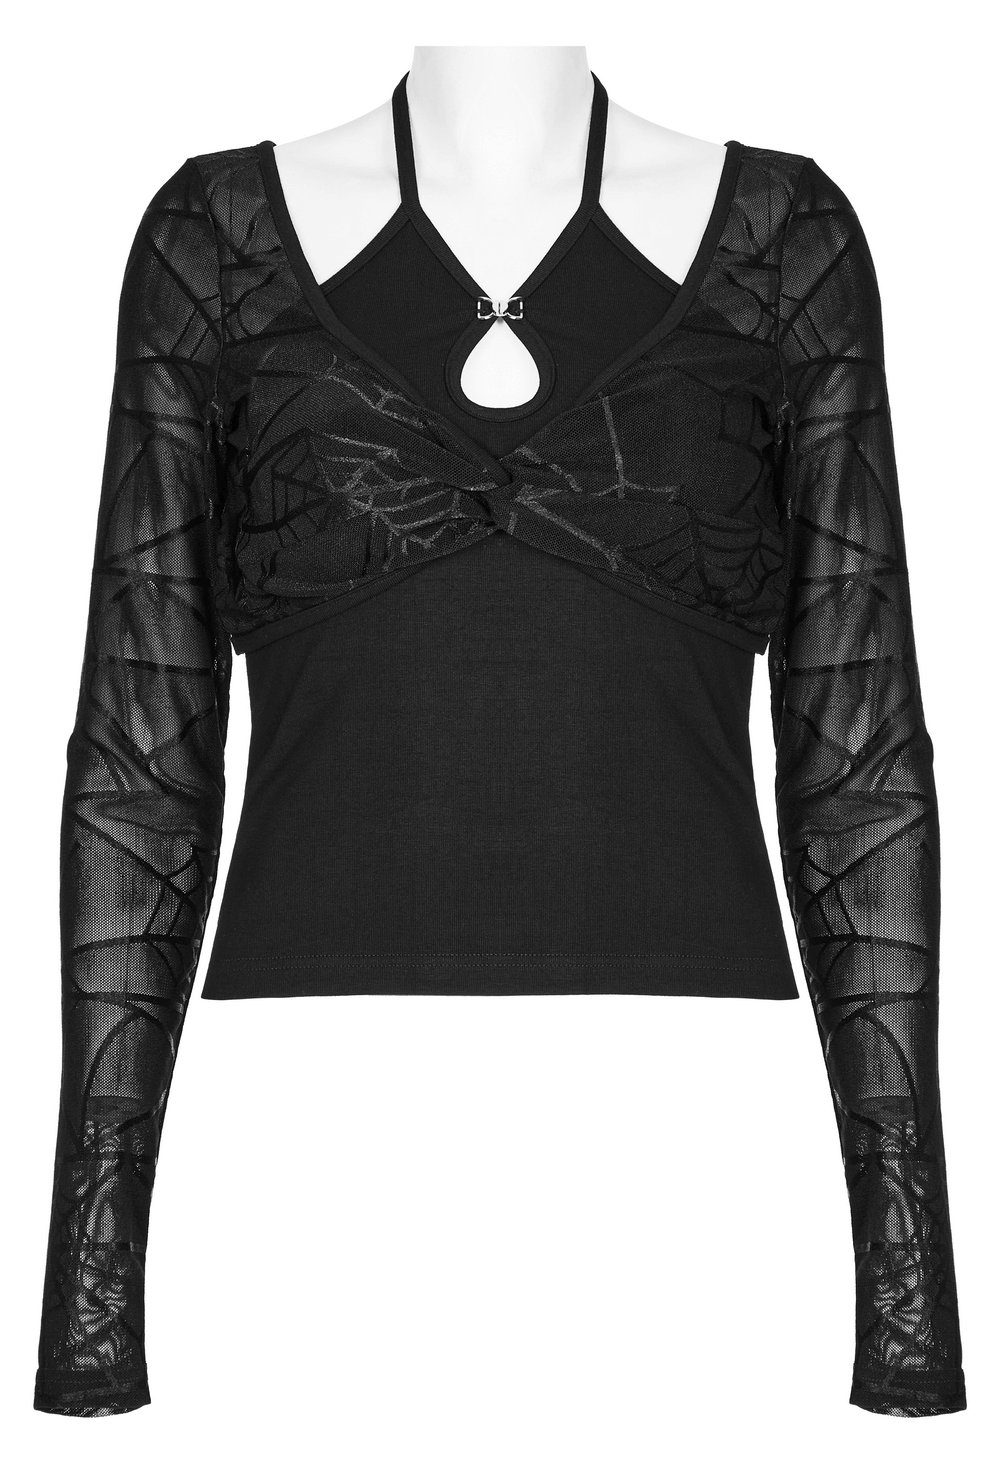 Black Halter Neck Two-Piece Top with Spiderweb Sleeves